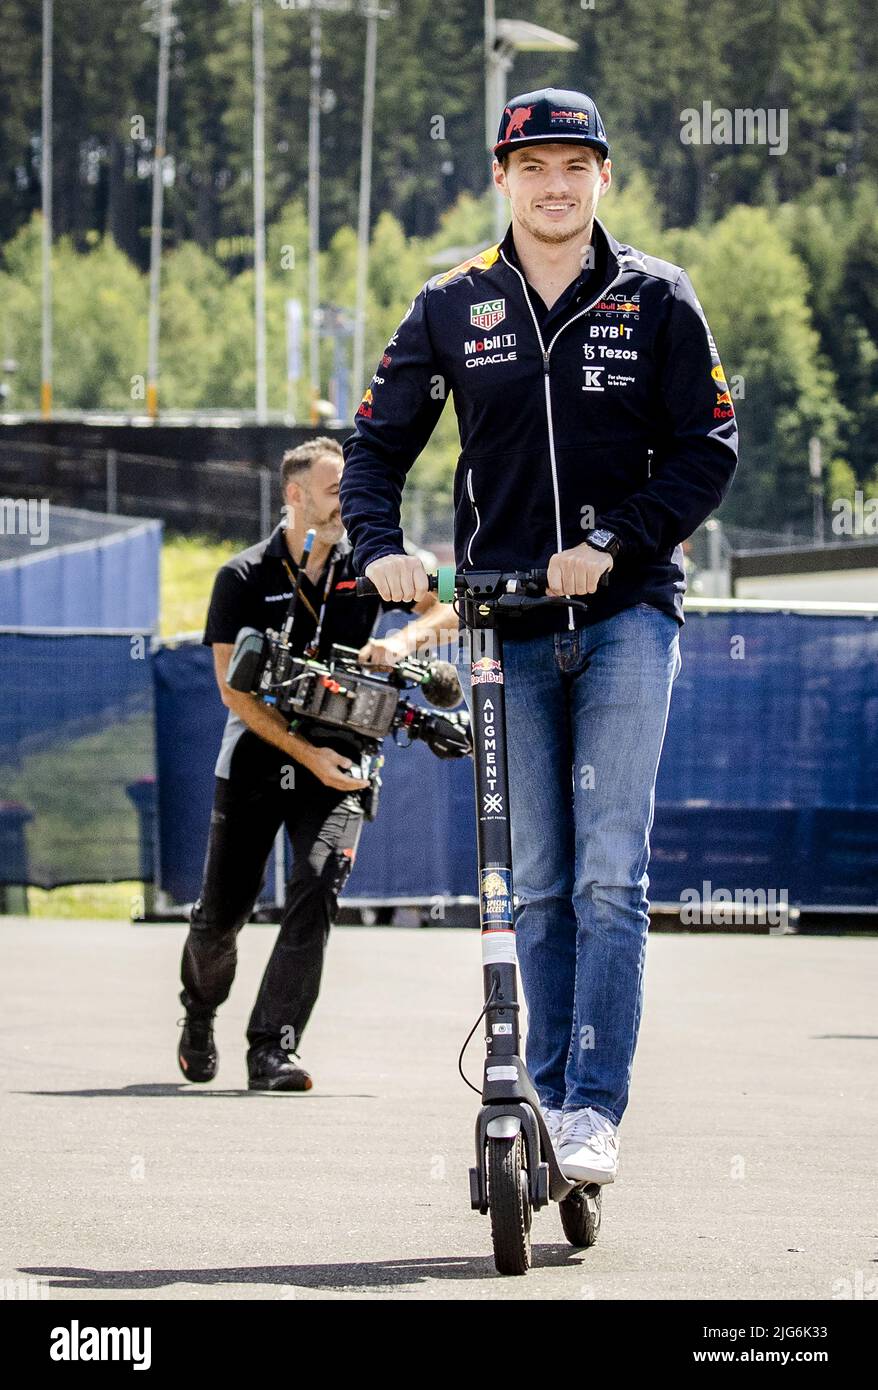 Spielberg, Austria. 08/07/2022, SPIELBERG - Max Verstappen (Red Bull Racing) arrives for 1st practice session ahead of the F1 Grand Prix of Austria at the Red Bull Ring on July 8, 2022 in Spielberg, Austria. ANP SEM VAN DER WAL Credit: ANP/Alamy Live News Stock Photo